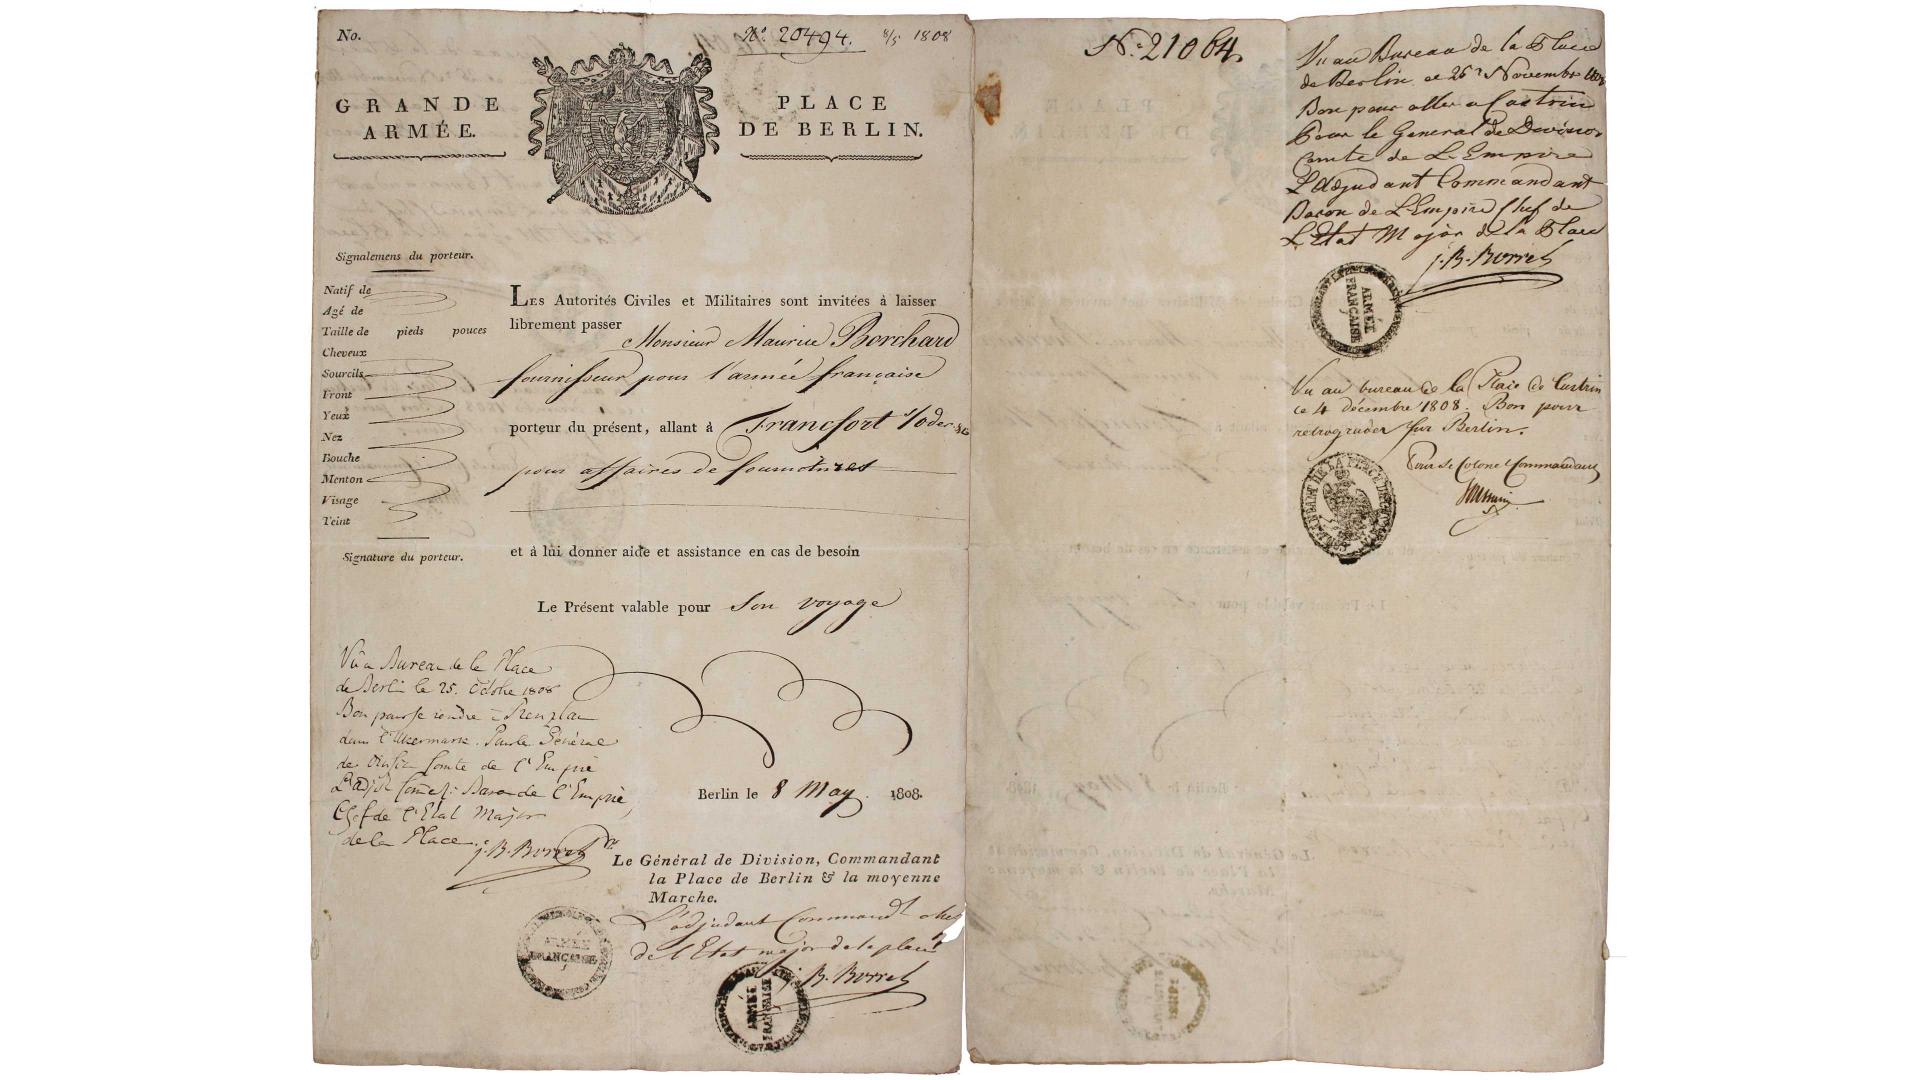 Historical document, provided with a seal